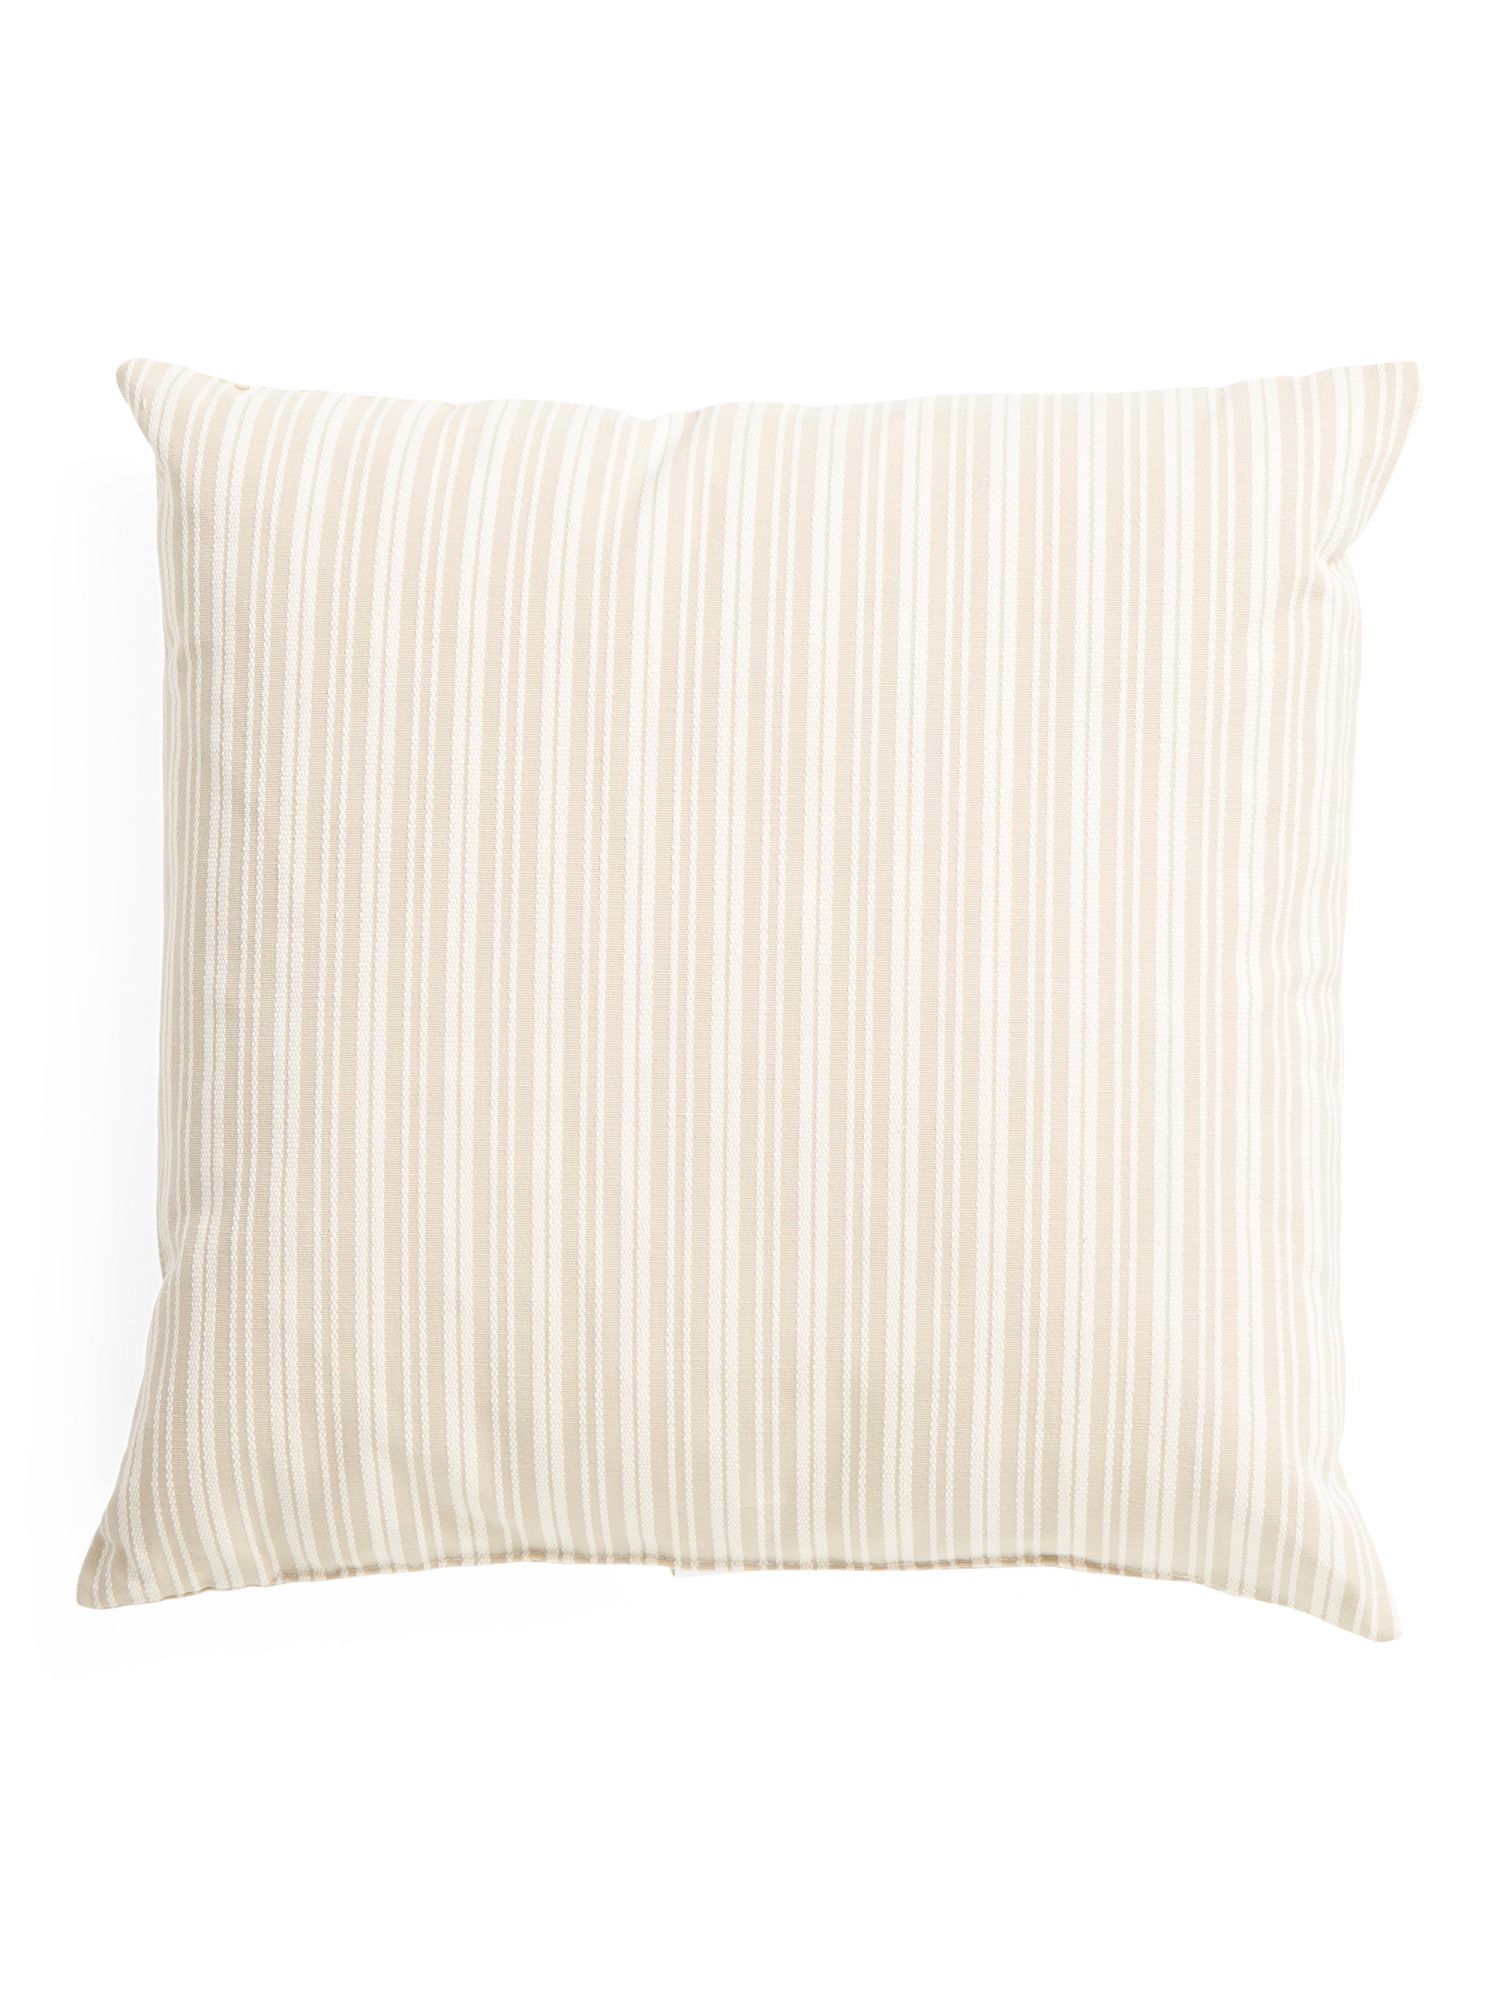 Made In Usa 22x22 Striped Pillow | Home | Marshalls | Marshalls